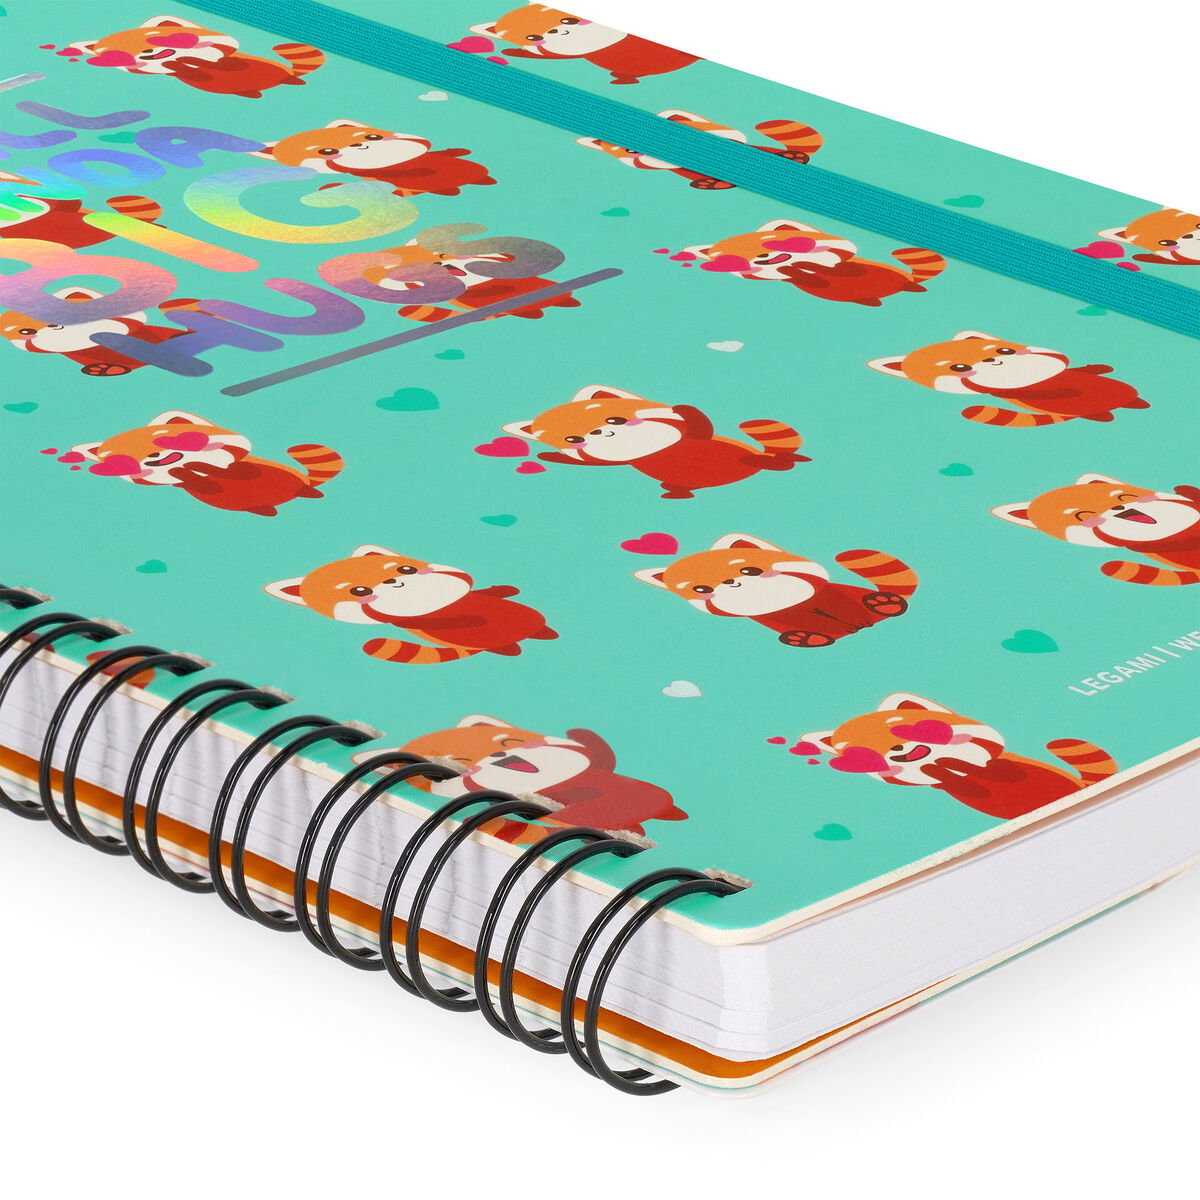 Lined Spiral Notebook - A5 Sheet - Large, , zoo